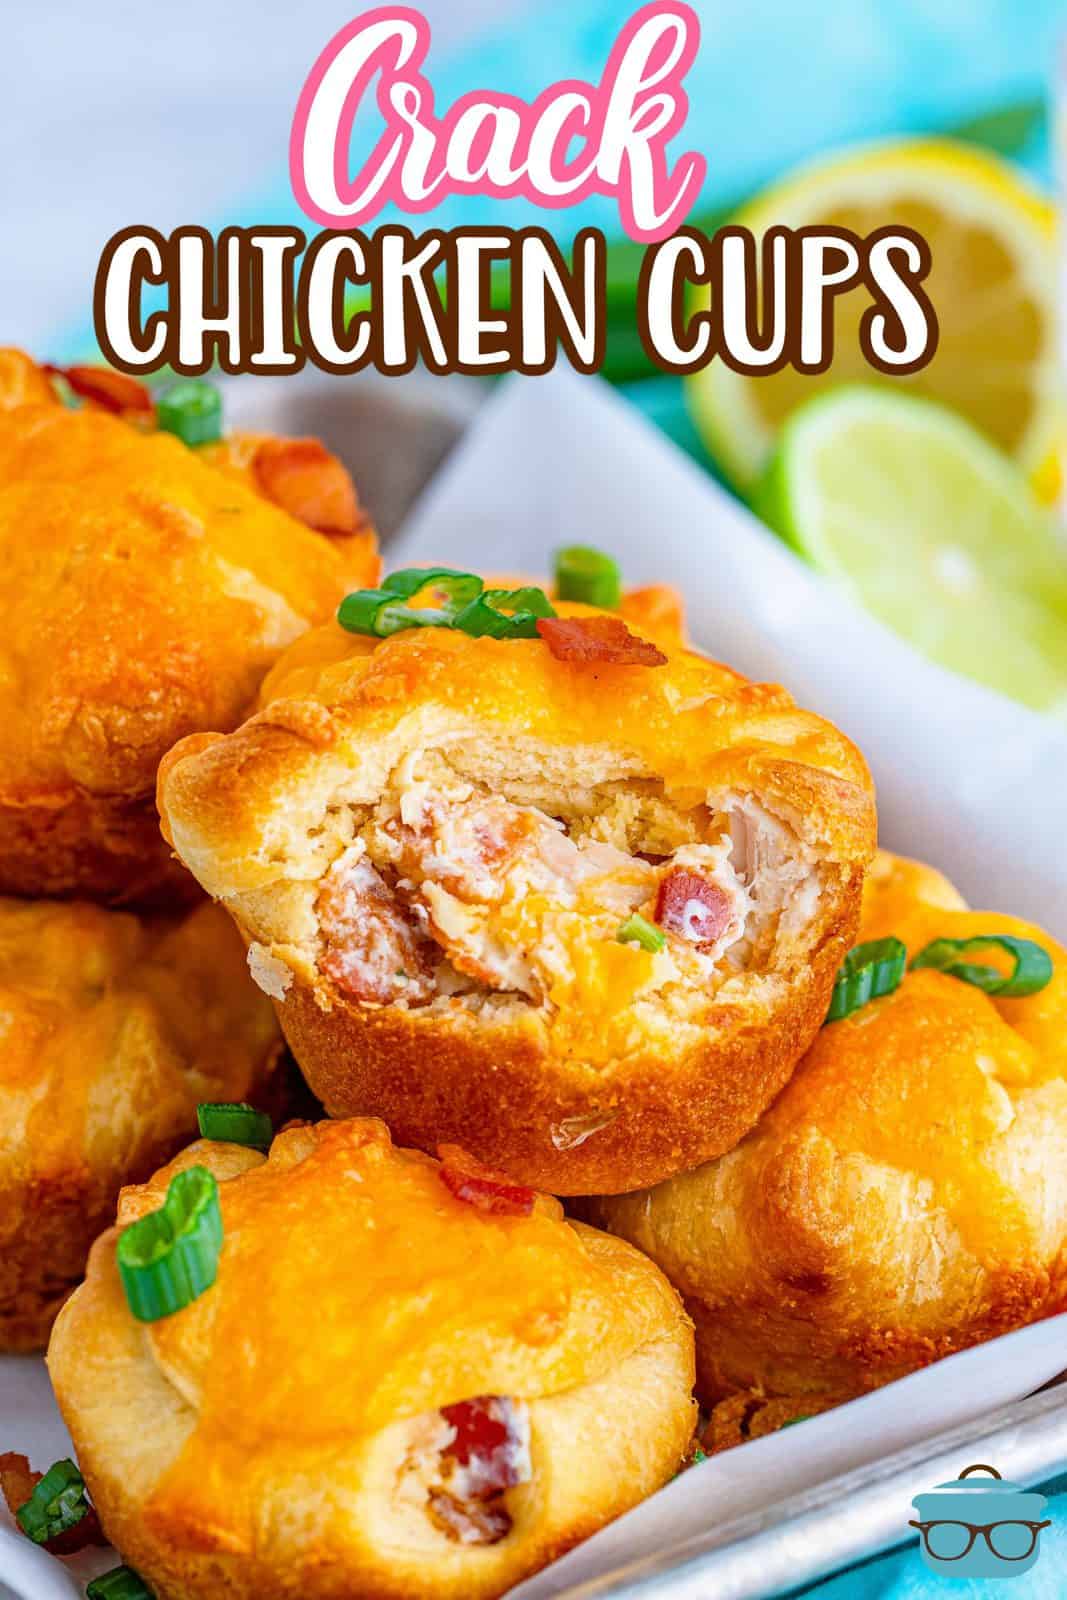 Stacked Crack Chicken Cups with bite taken out of top one Pinterest image.